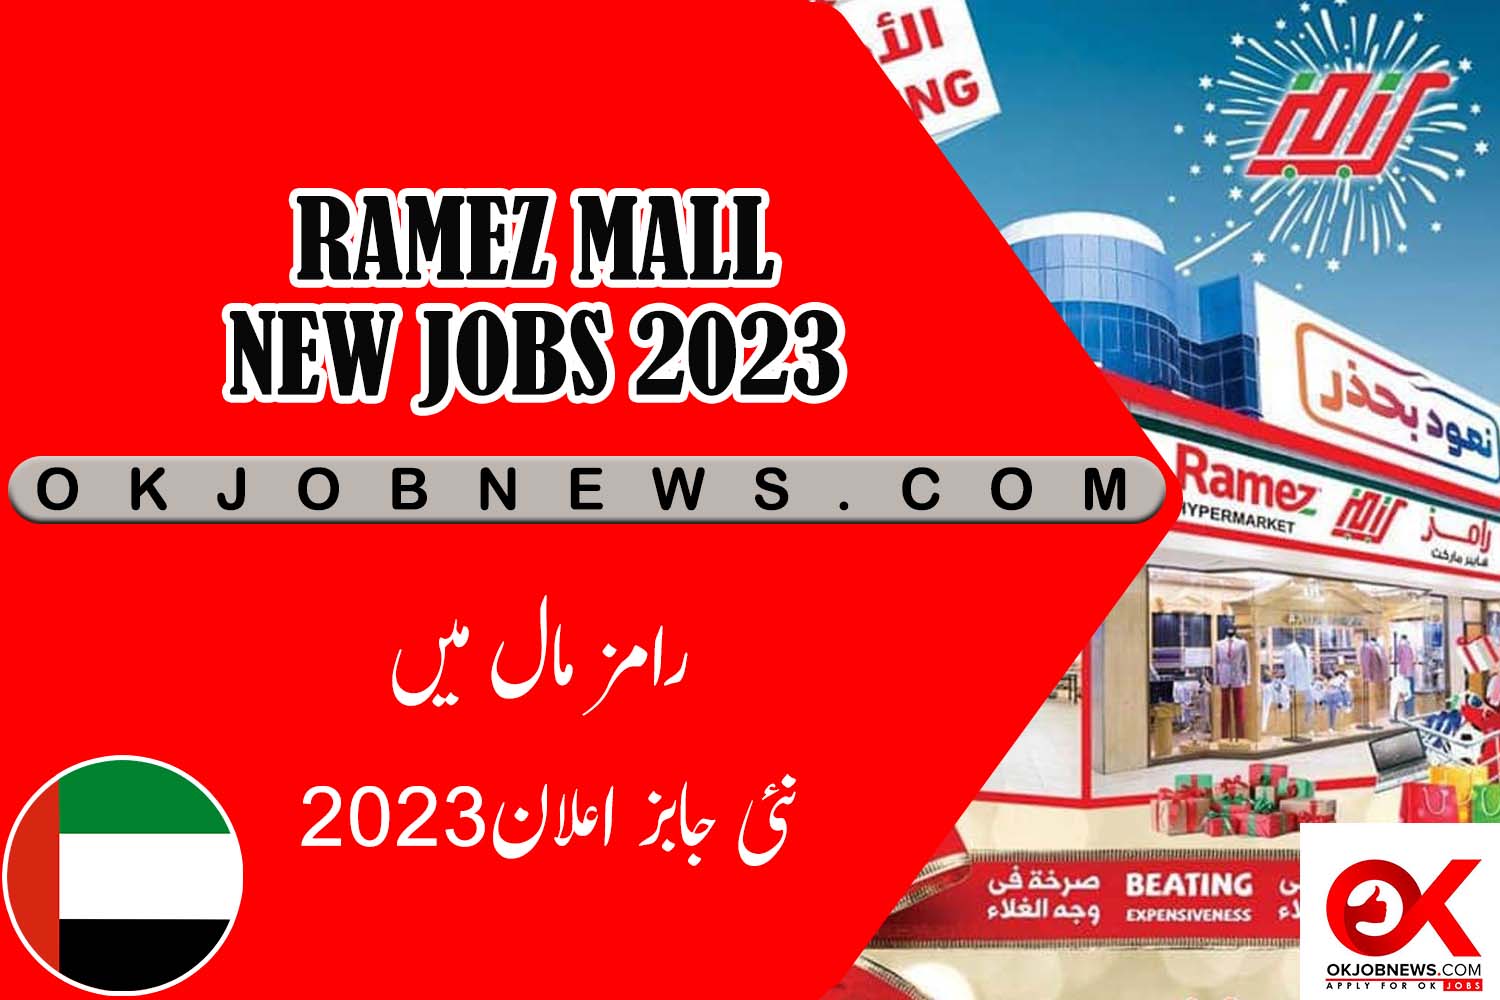 Ramez Mall Announces New Job Openings for 2023